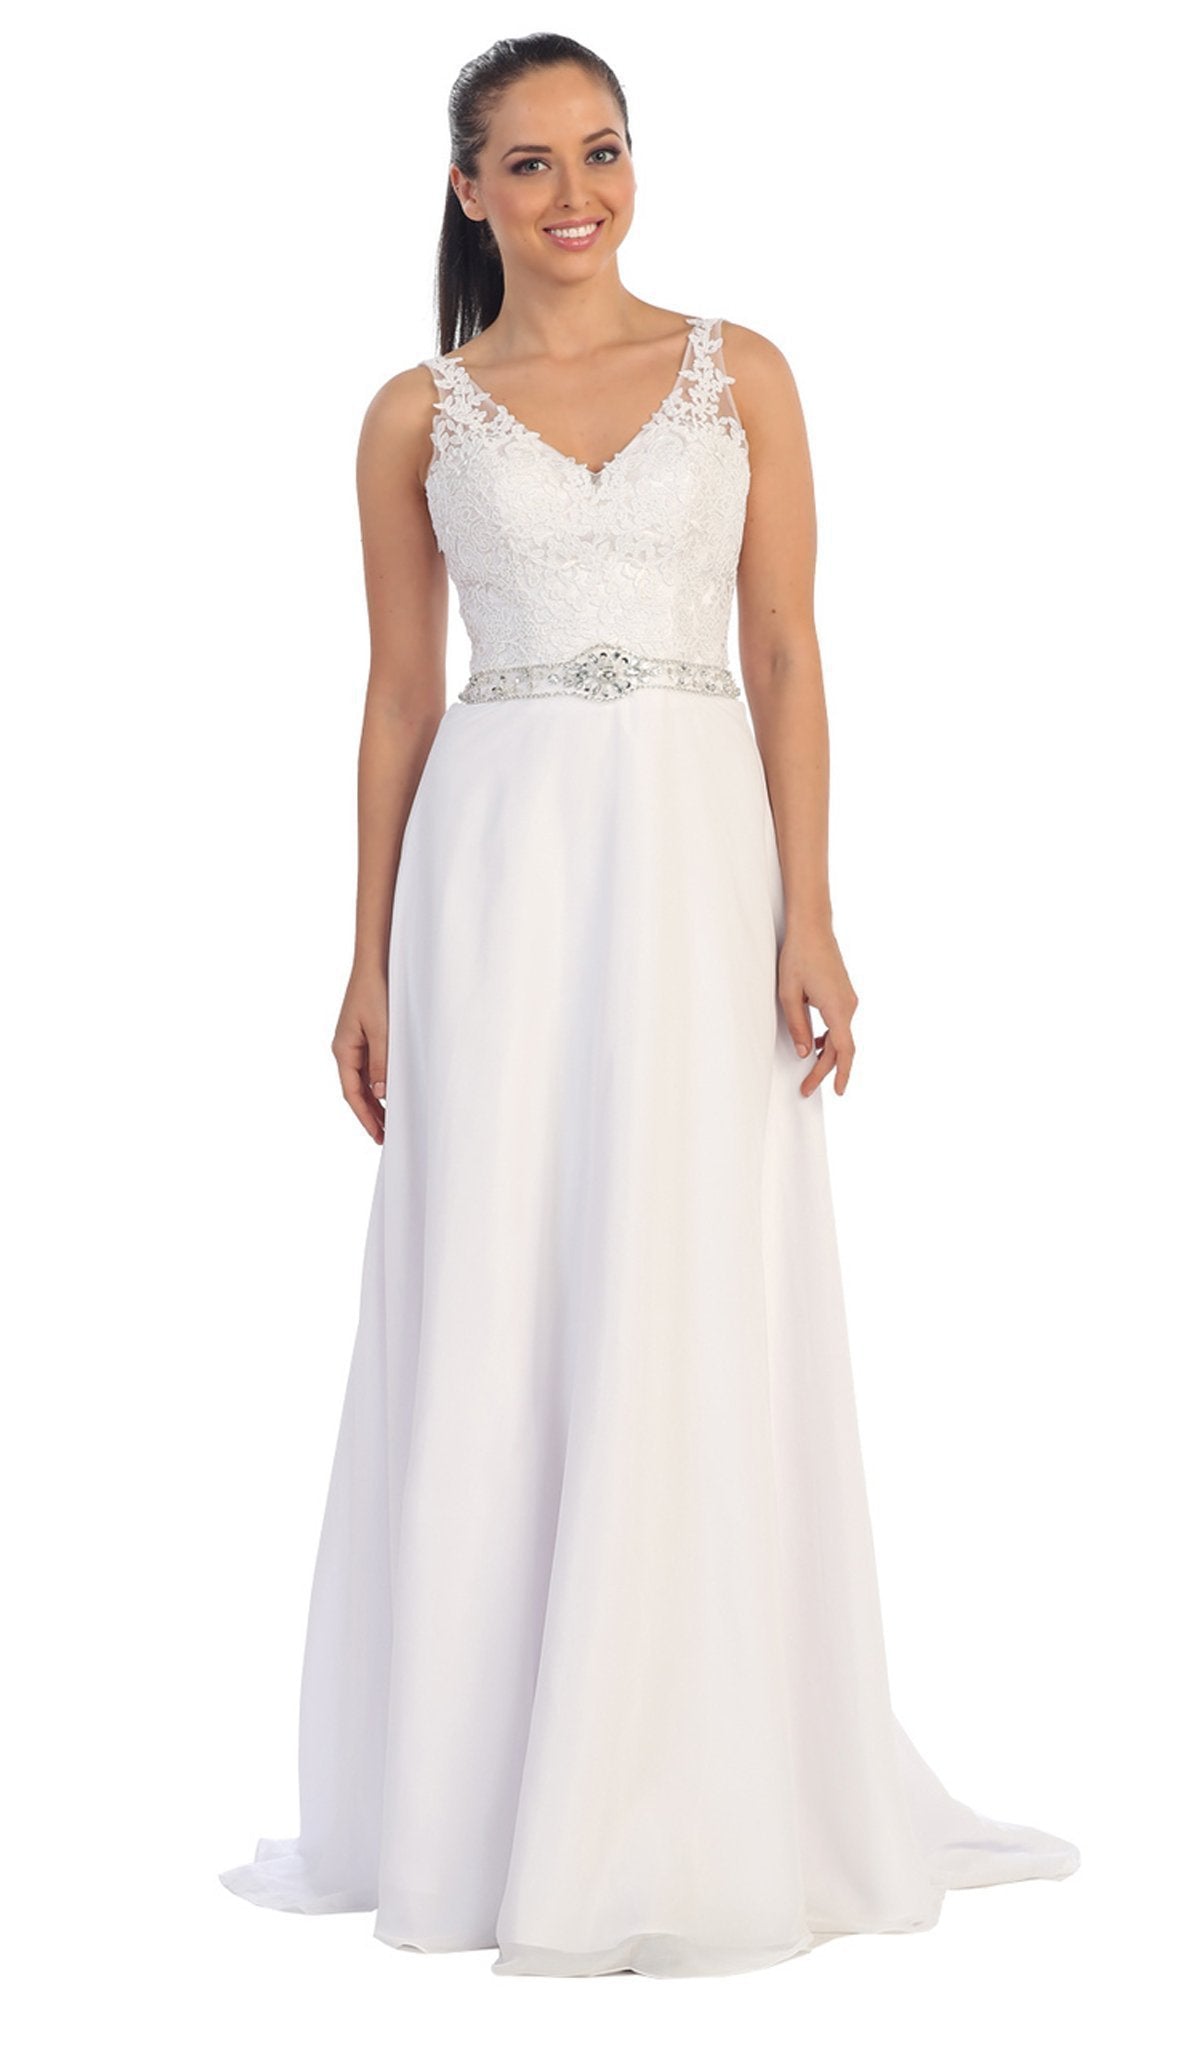 Dancing Queen - 9176 V-neck Lace Evening Gown